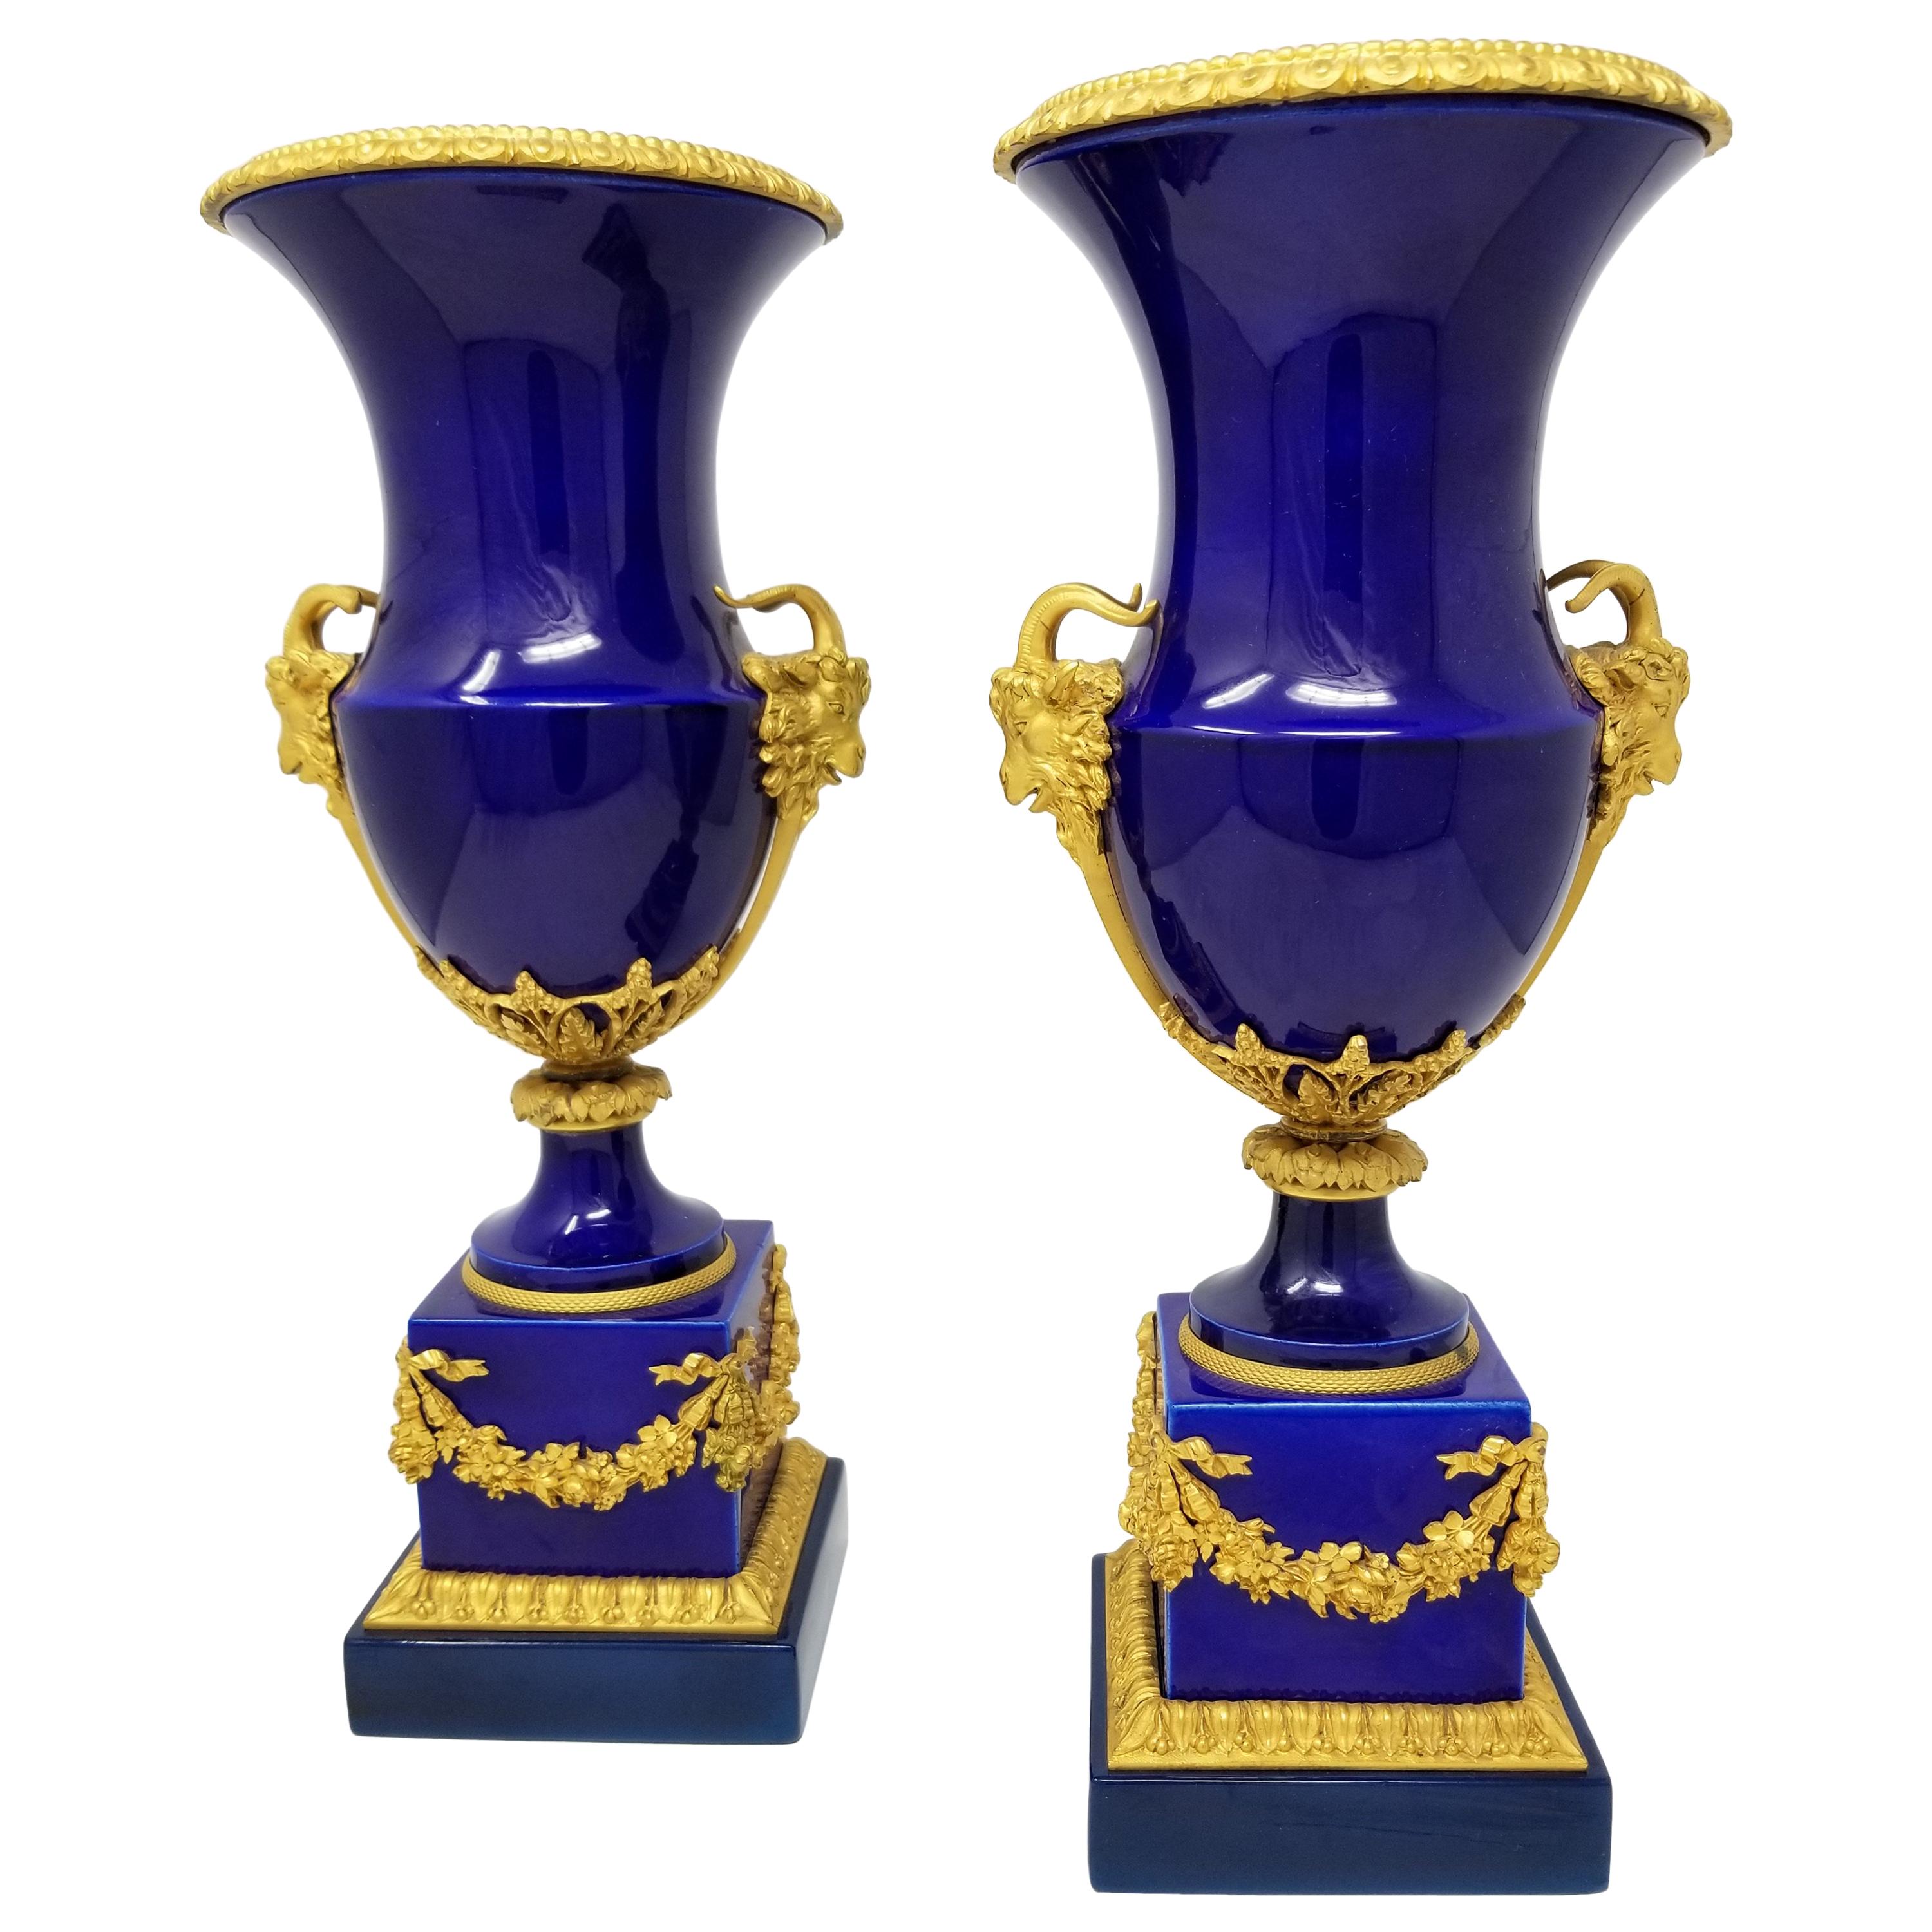 Beautiful Pair of French Louis XVI Sevres Cobalt Blue Porcelain and Ormolu Vases